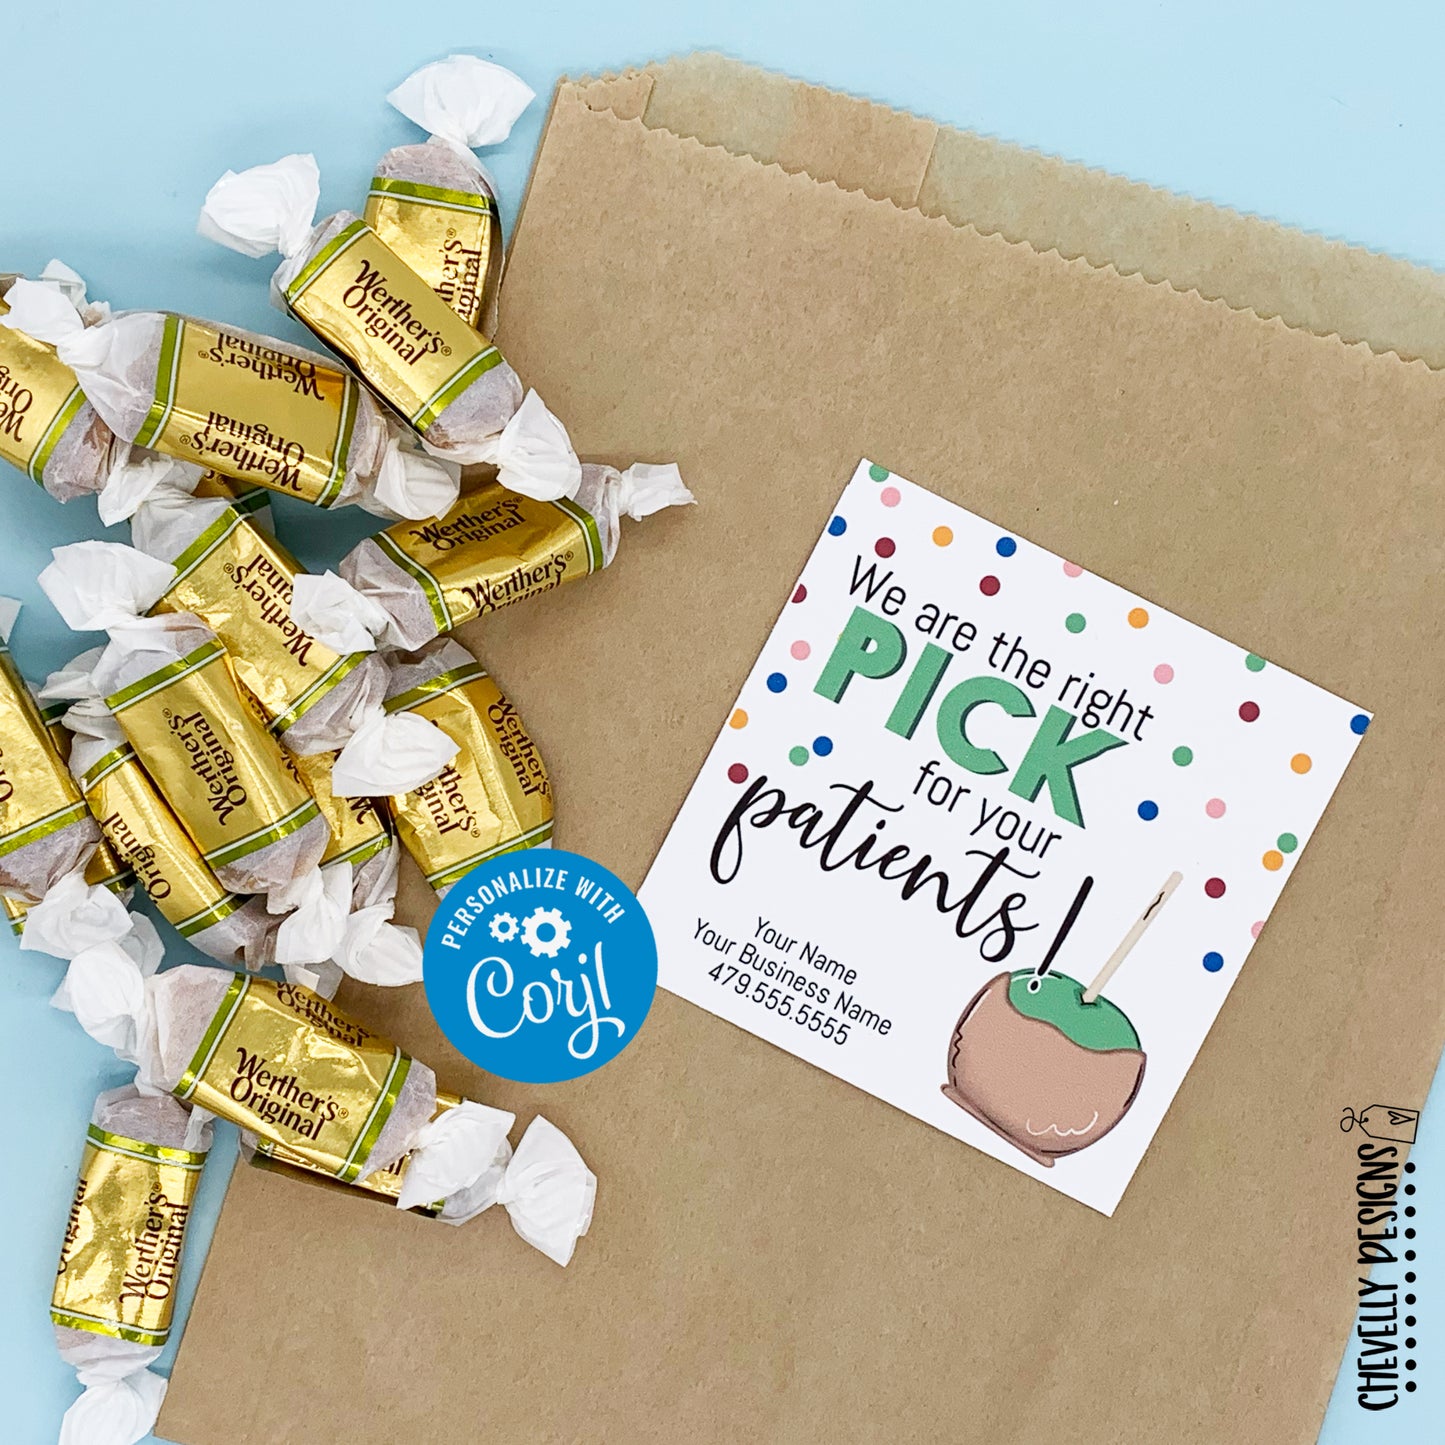 EDITABLE -  We Are The Right Pick For Your Patients - Caramel Apple Gift Tags - Business Referral Marketing - Printable Digital File